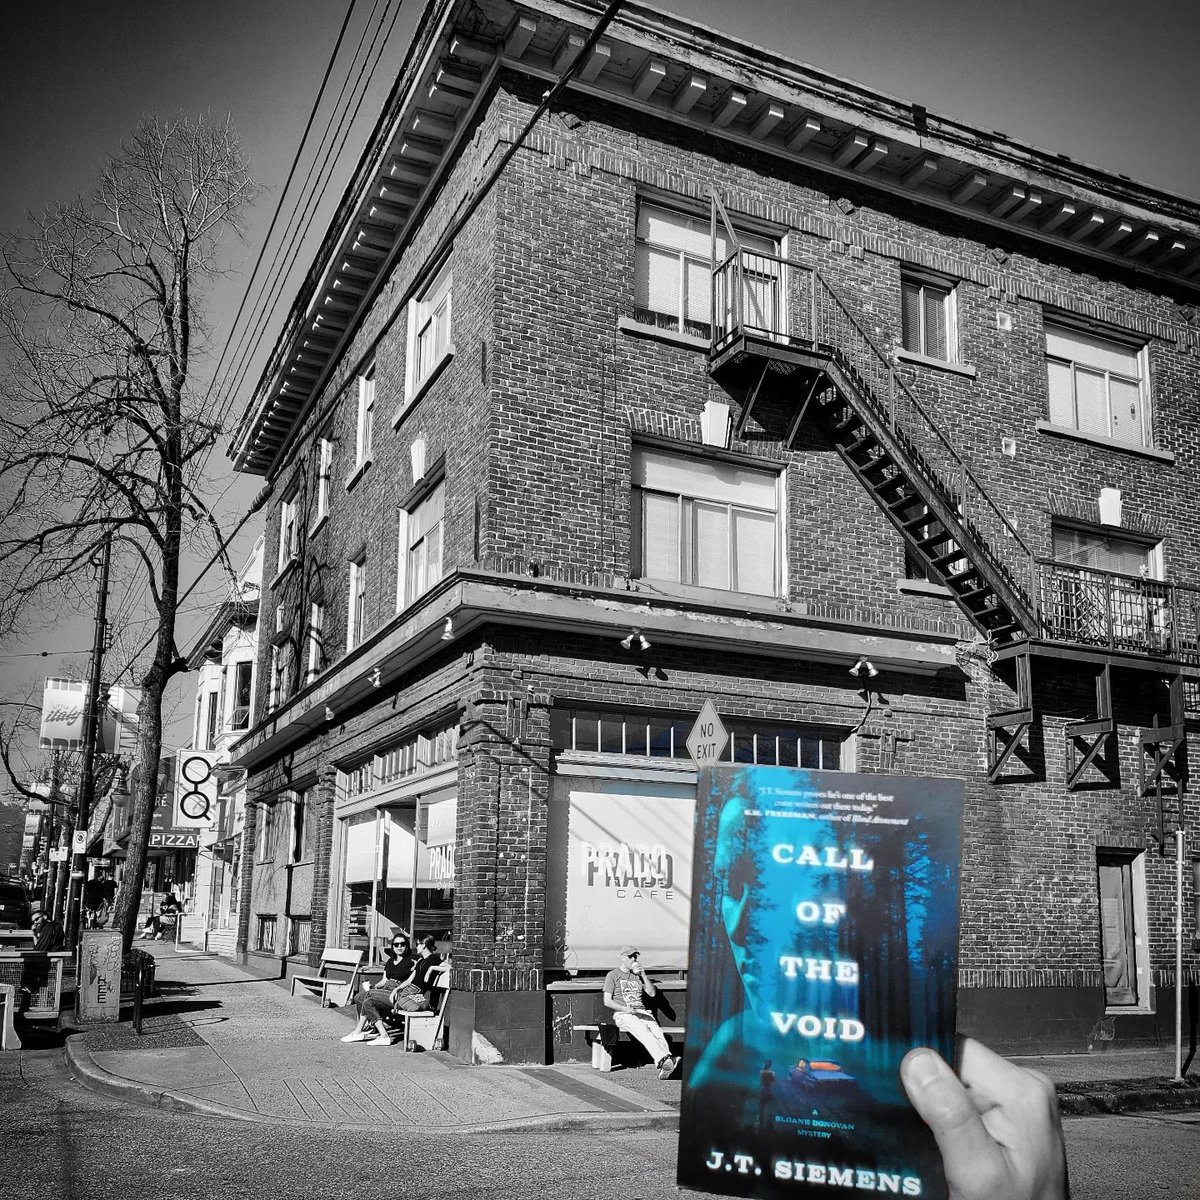 #1 in the CALL OF THE VOID locations tour. NE corner of Commercial & 4th, in Vancouver, home of Hardknocks Investigations & Security Services, Inc. ⁦@NeWestPress⁩ #CrimeFiction #SloaneDonovan amazon.ca/Call-Void-J-T-…